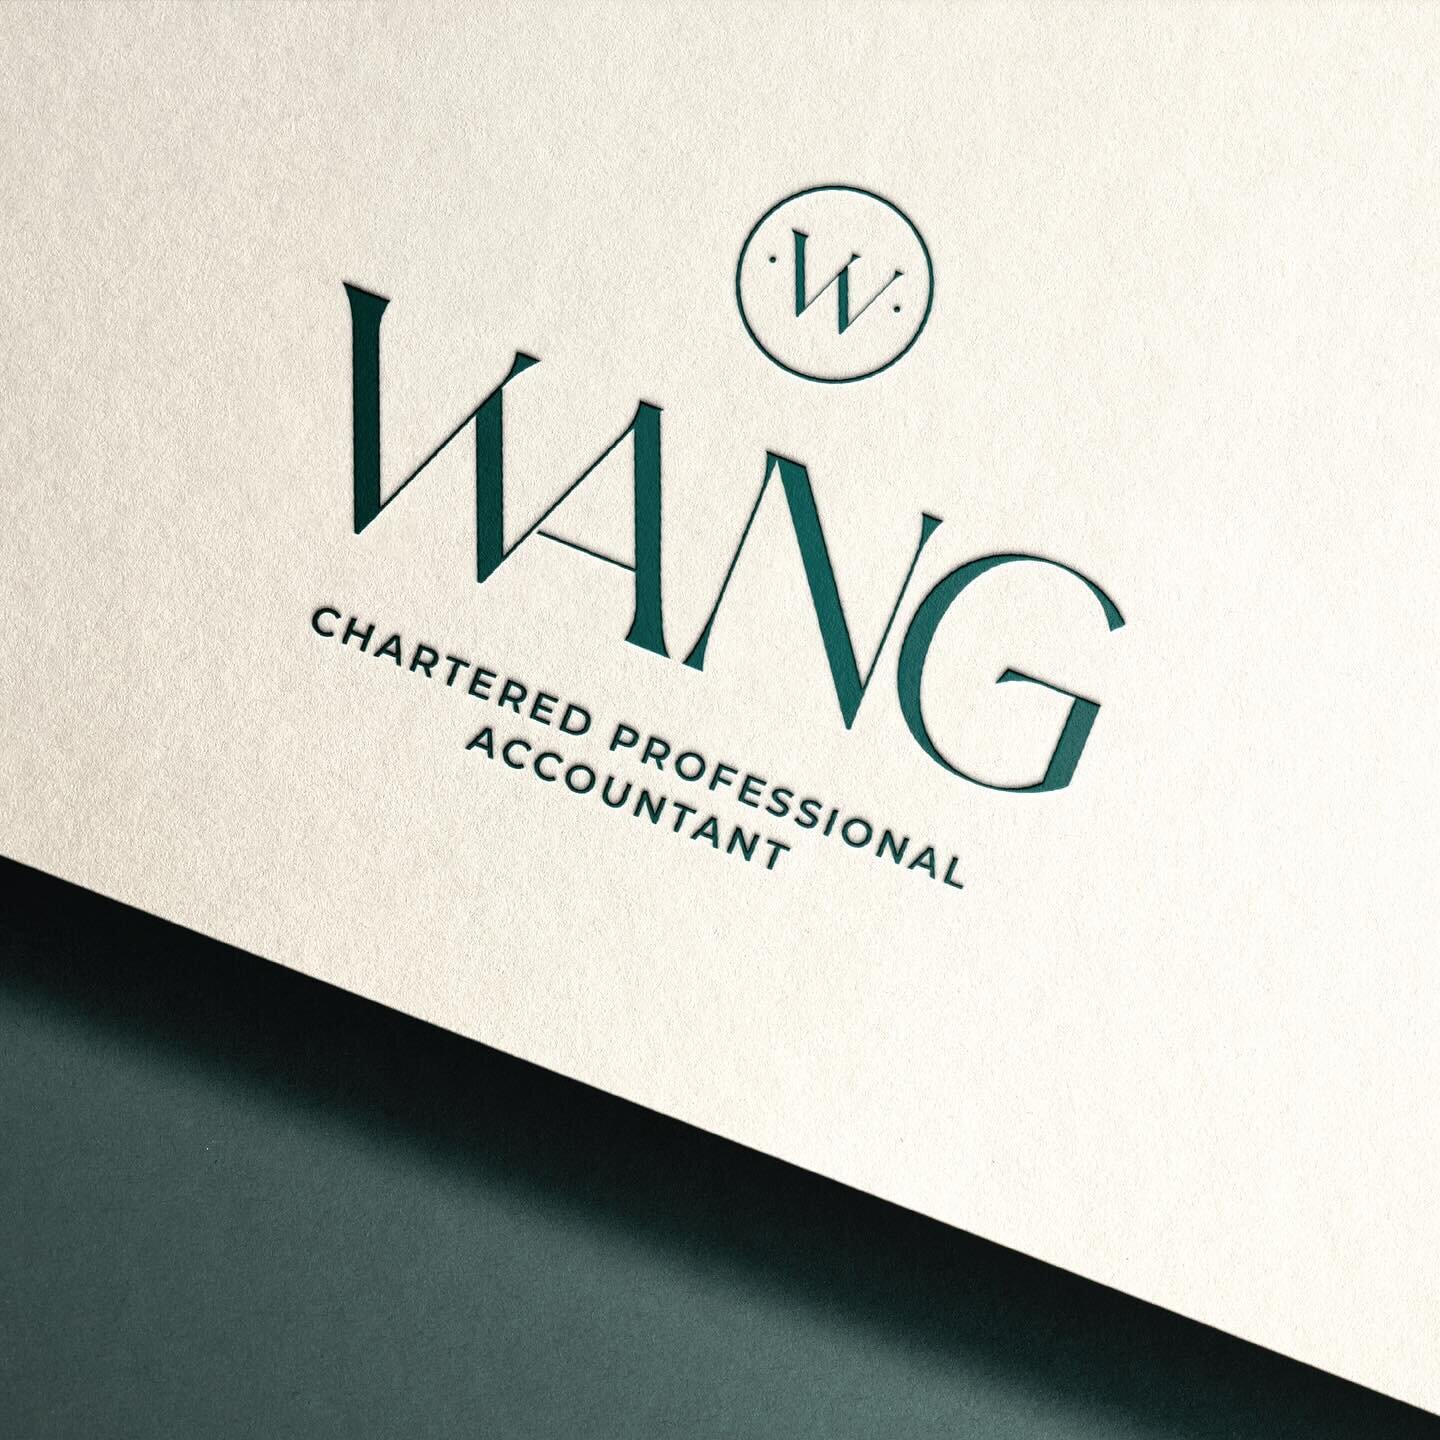 A fresh brand for Wang Chartered Accounting! Who said accounting firms had to be boring and dull? 😉

This brand development has been keeping me busy for the last little bit and I&rsquo;m excited to finally share a sneak peek! Wang Chartered Accounti